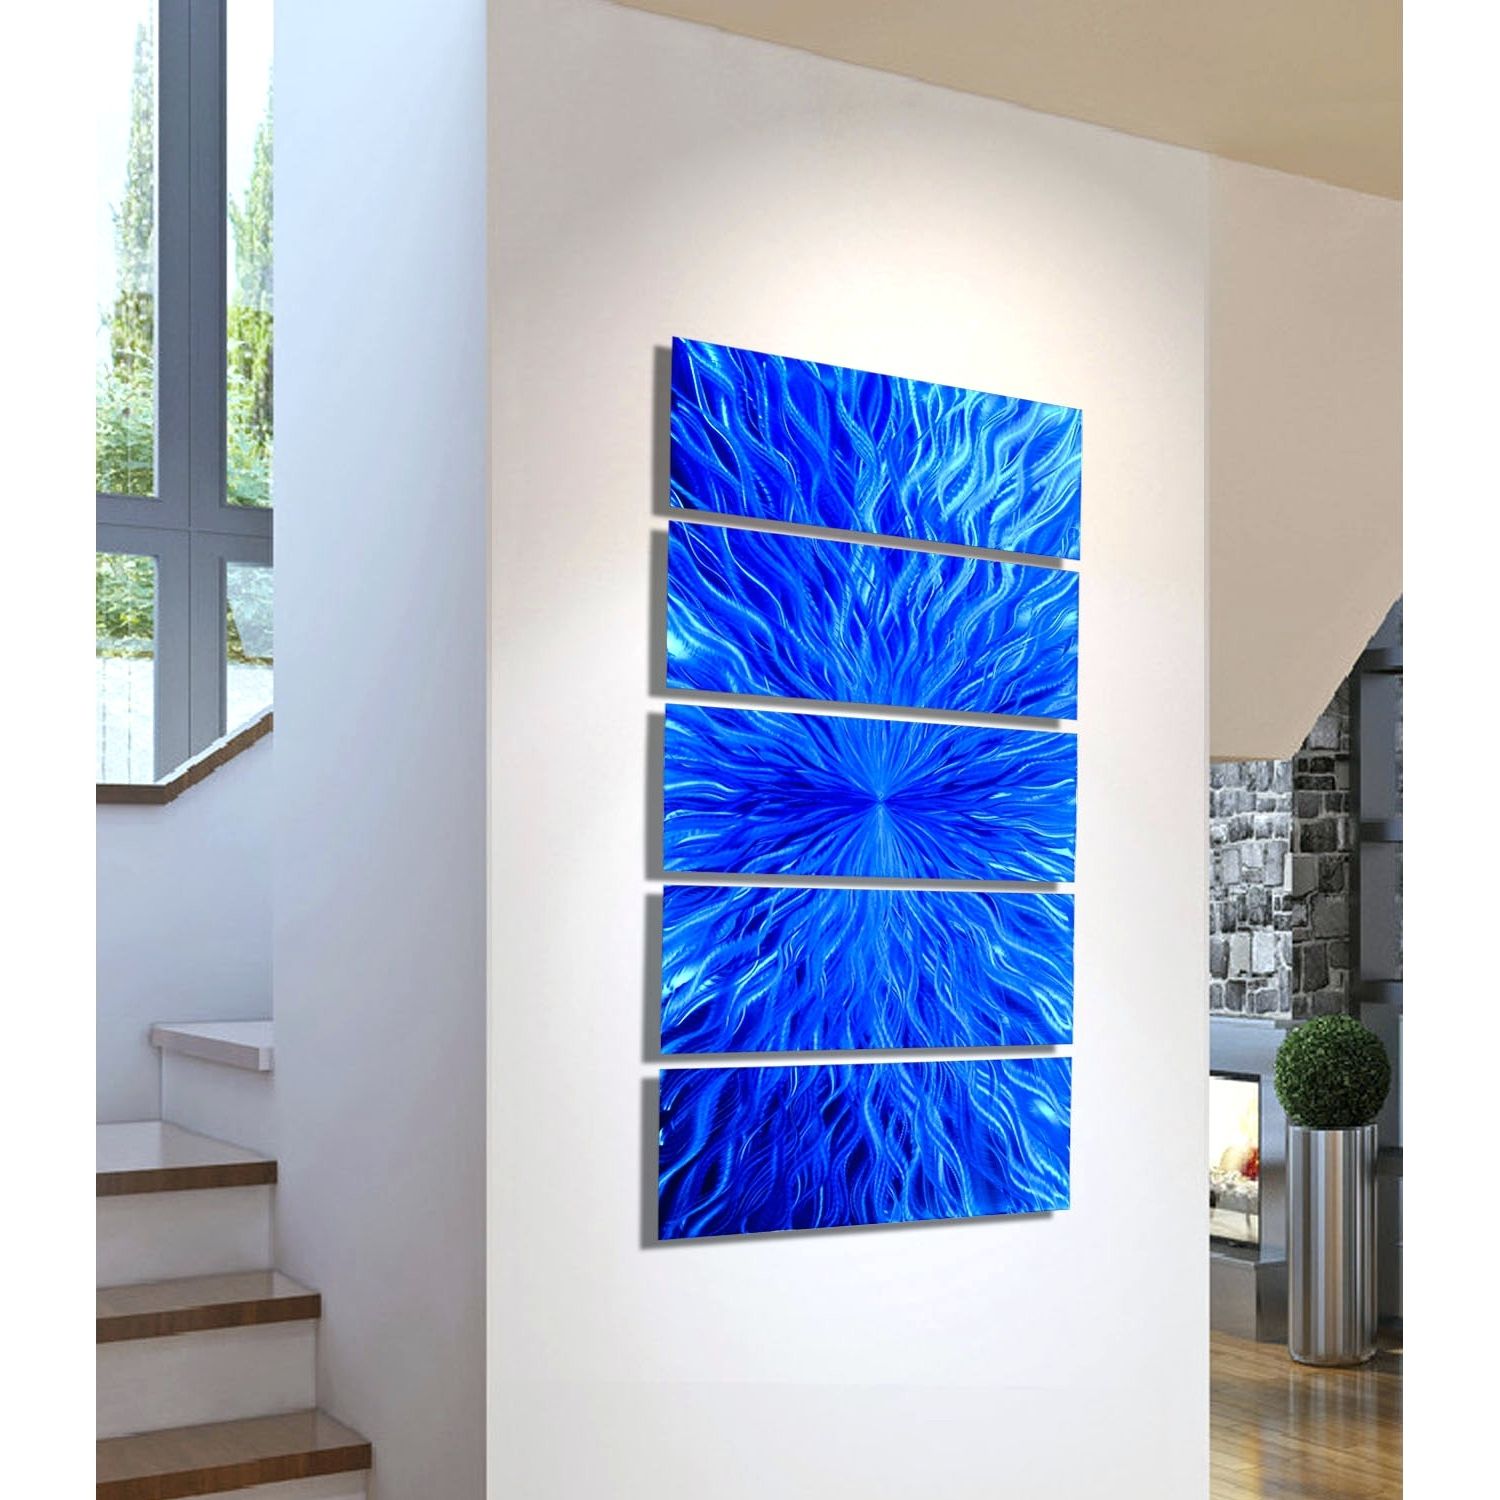 15 Inspirations Fused Glass And Metal Wall Art